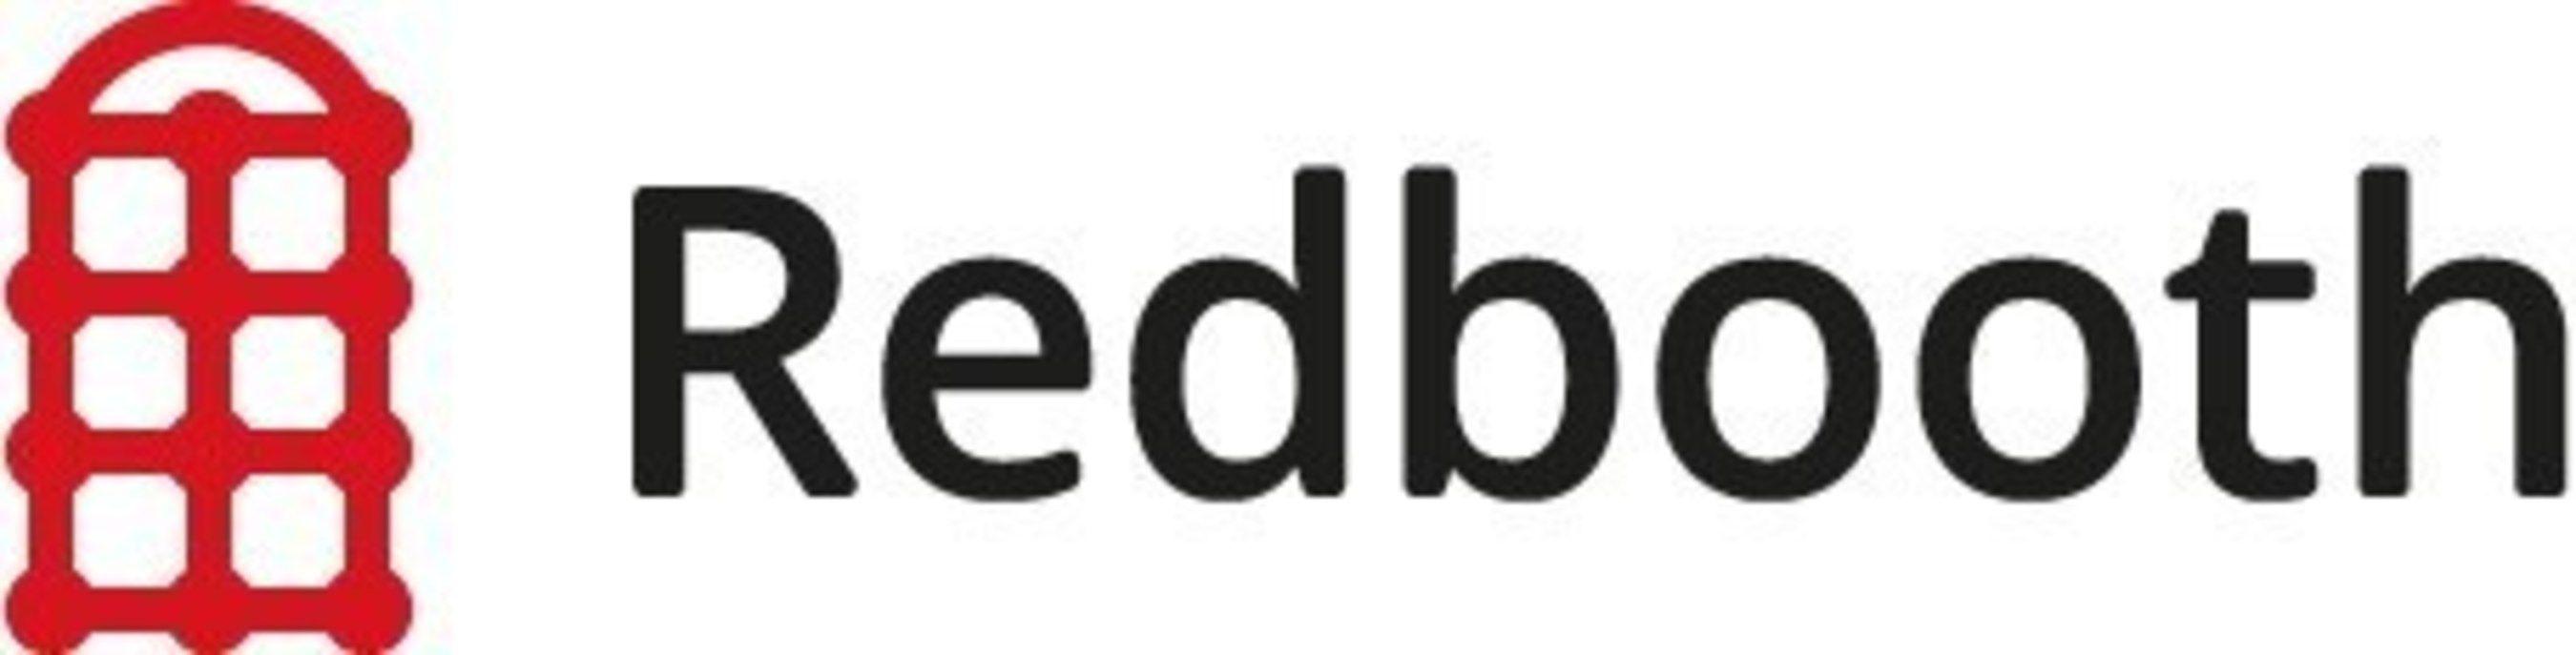 Red Booth Logo - Redbooth Raises $11M Series B and Signs OEM Deal for CA Technologies ...